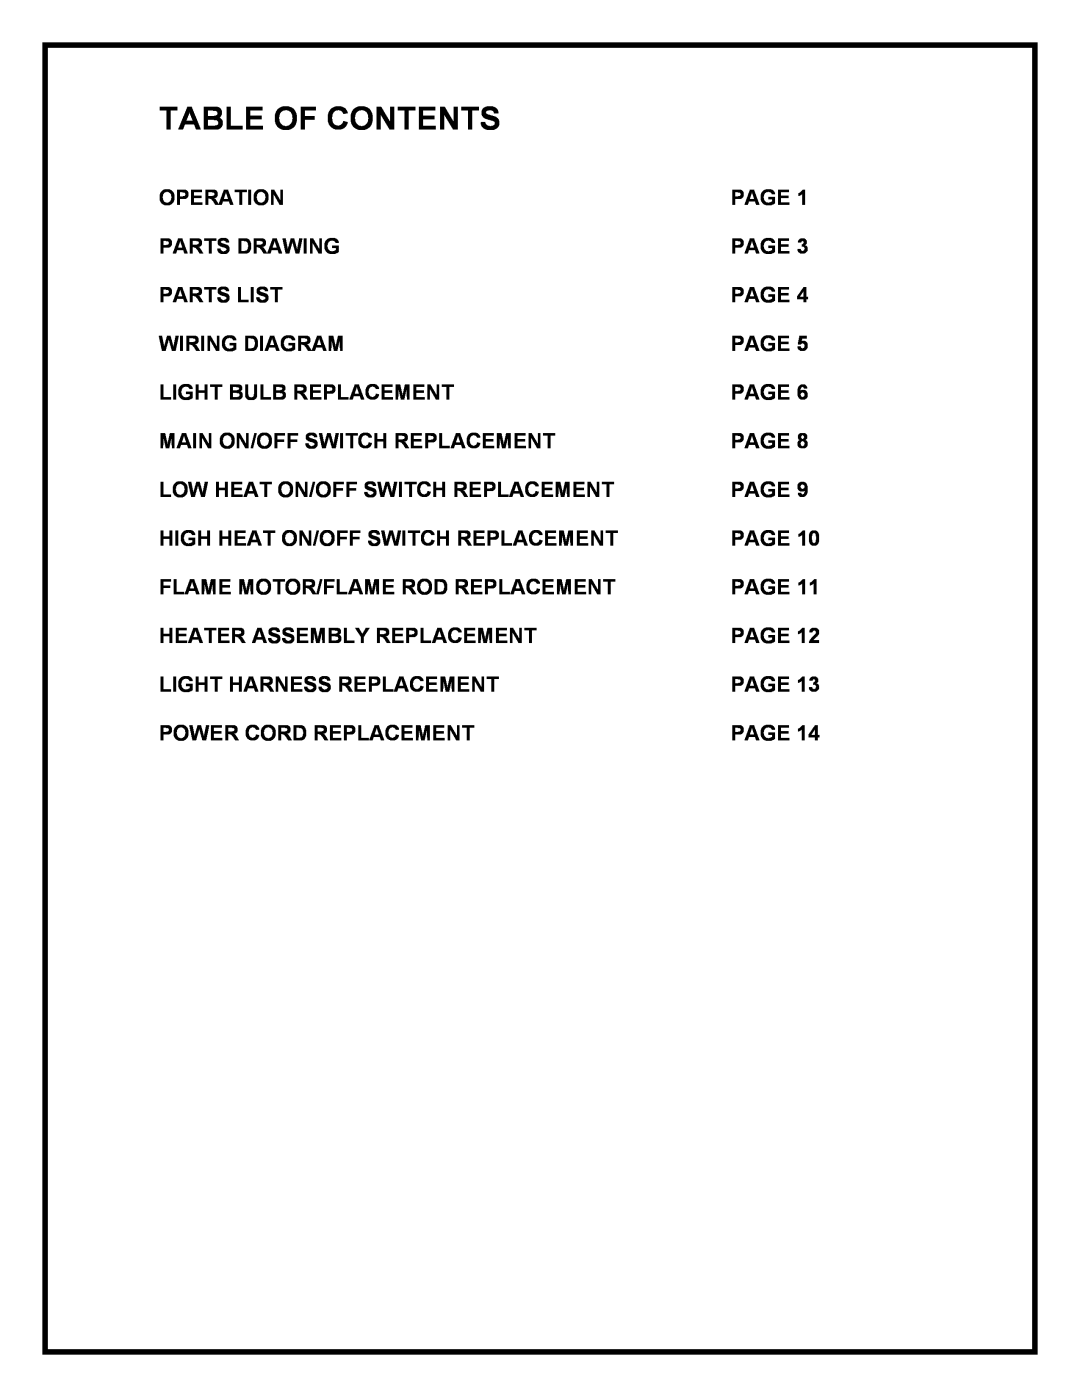 Dimplex DFI2309 service manual Table Of Contents 